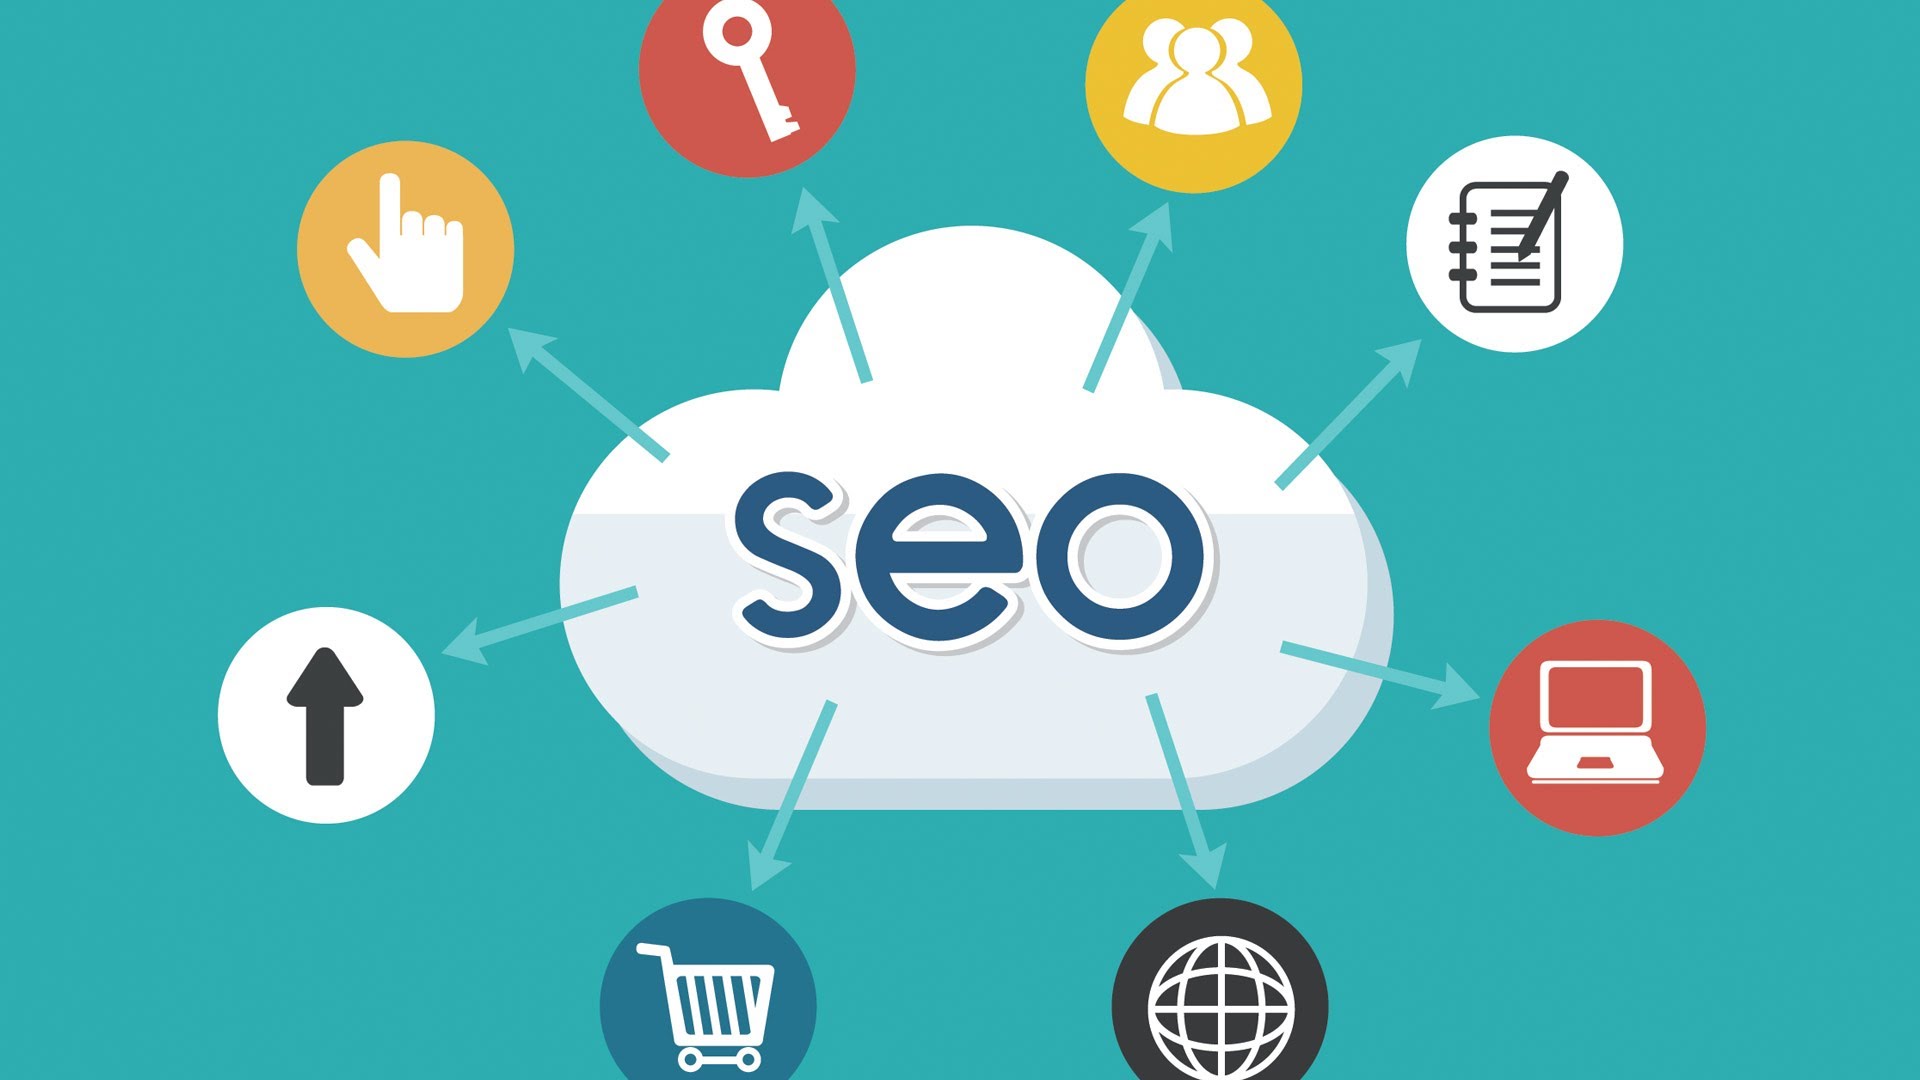 Small SEO Business Services | Affordable SEO Services for Small Business | Small Business SEO Tips